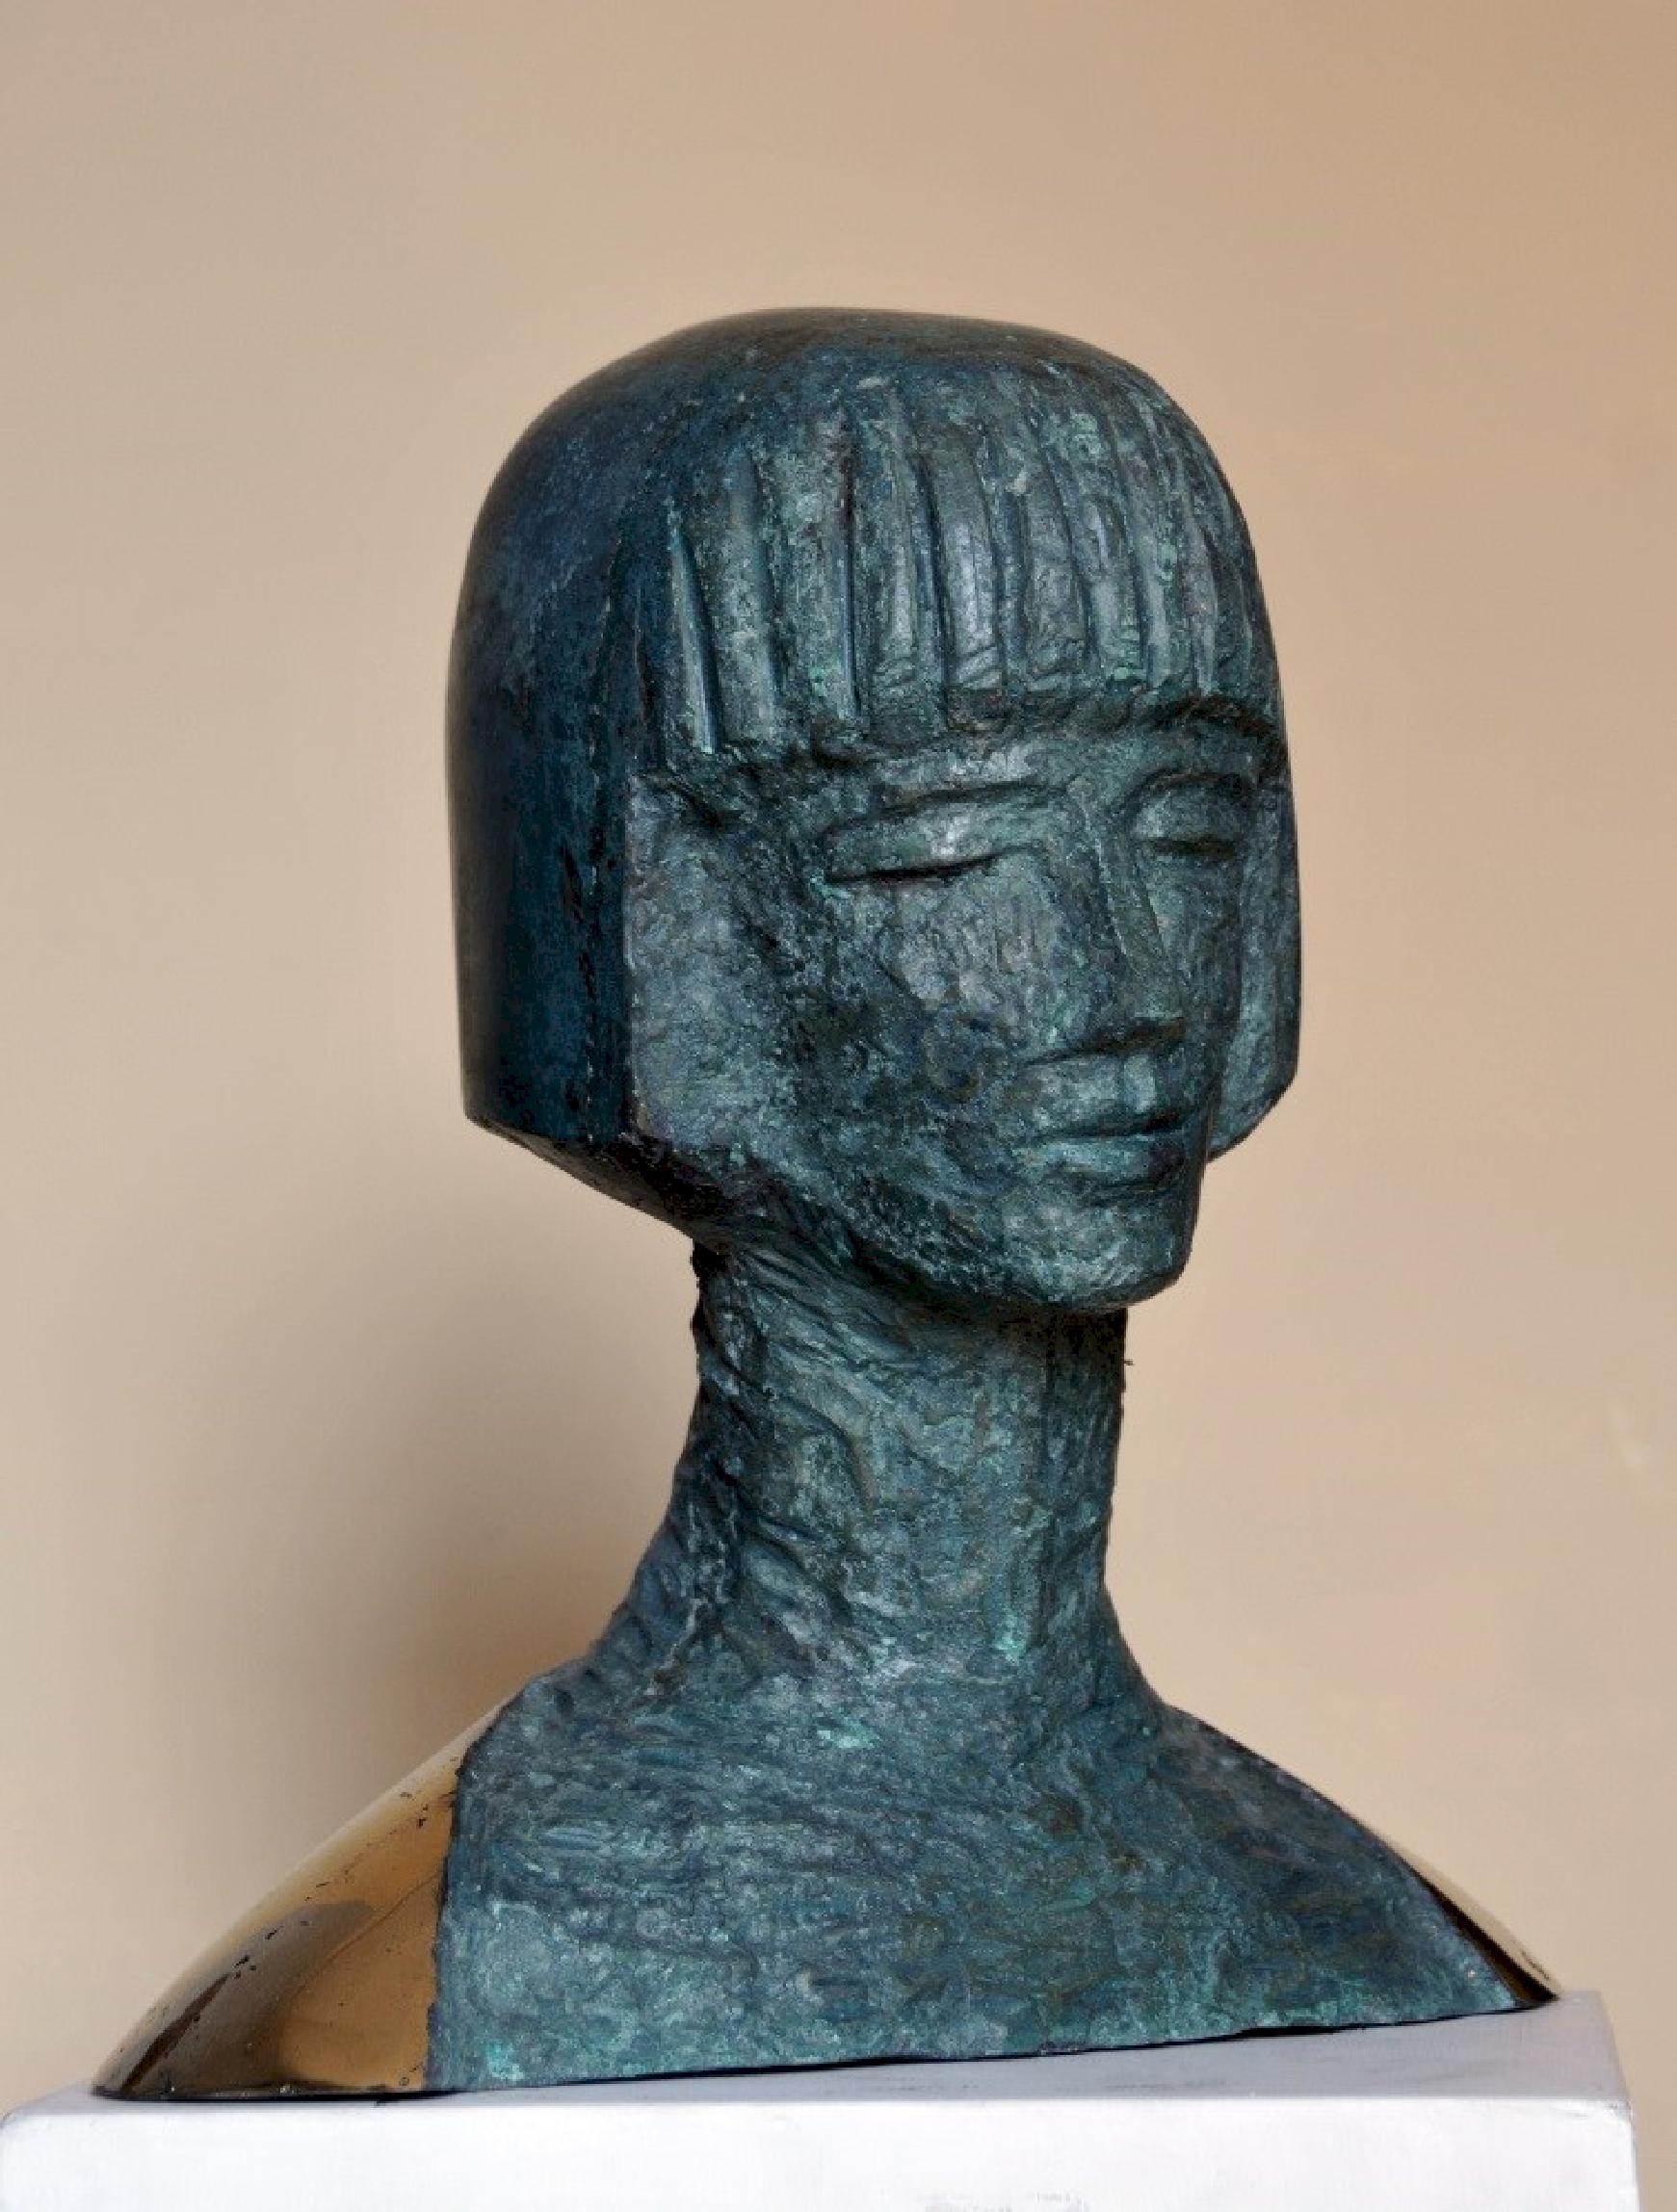 "Patty" Bronze Sculpture 17" x 17" x 9" inch by Sarkis Tossonian

Sarkis Tossoonian was born in Alexandria in 1953. He graduated from the Faculty of Fine Arts/Sculpture in 1979. He started exhibiting in individual and group exhibitions in Alexandria